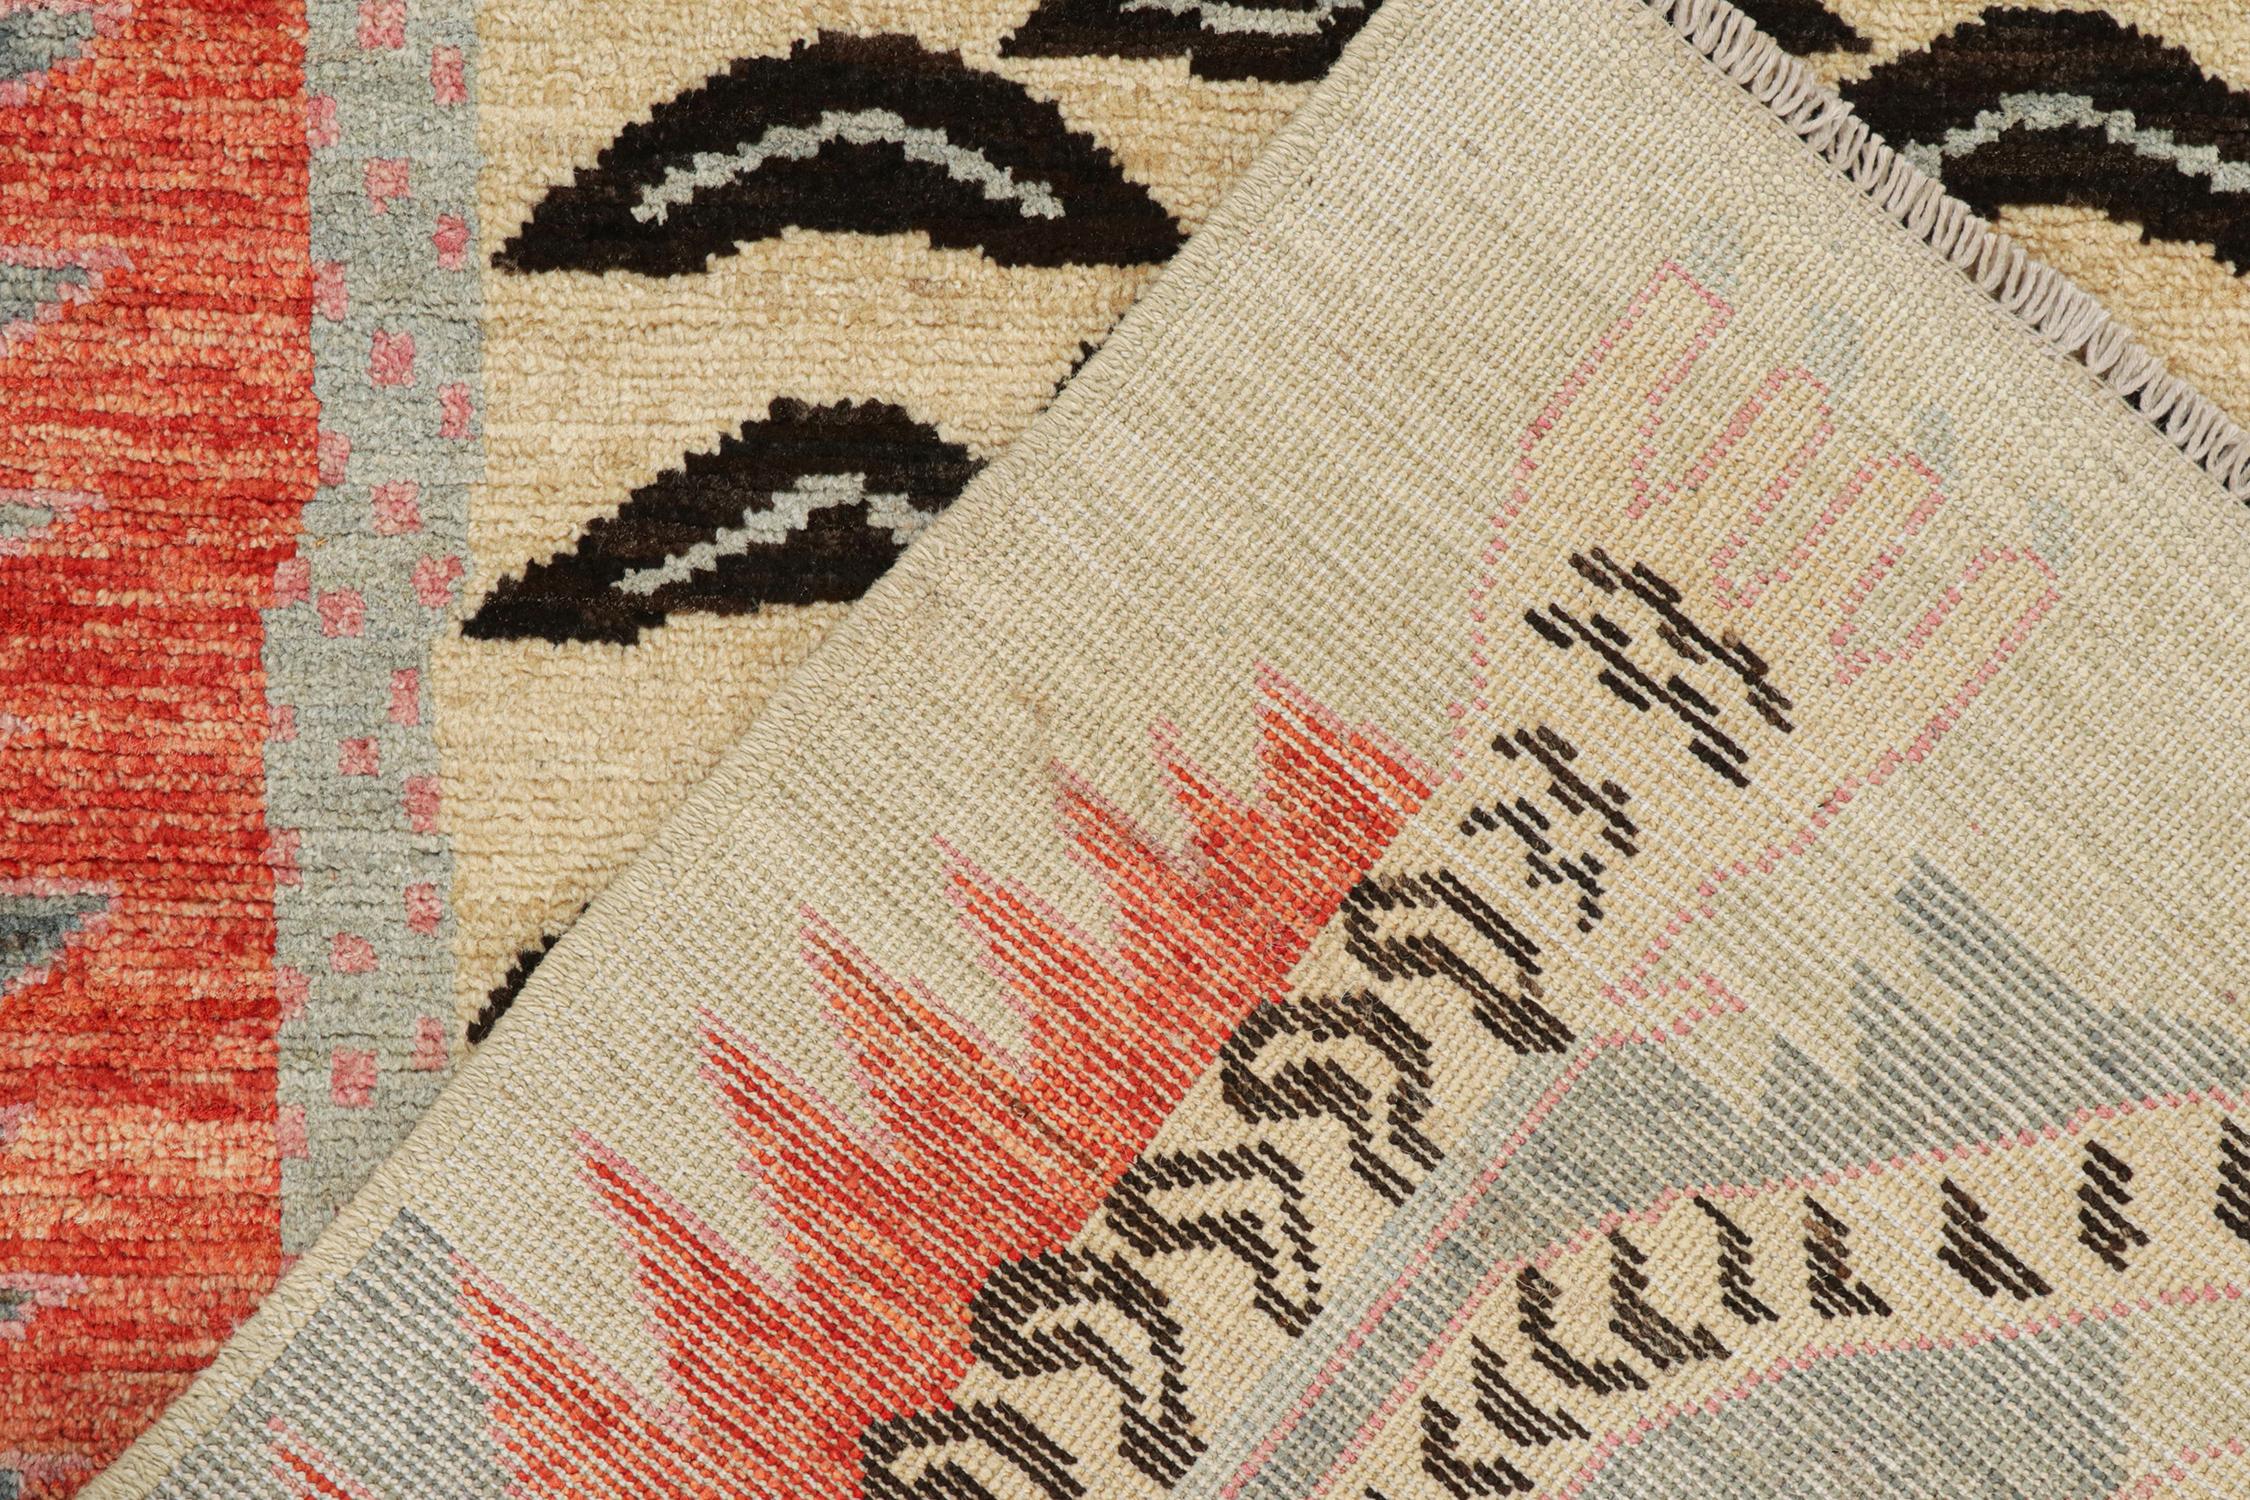 Wool Rug & Kilim’s Classic Style Tiger-Skin Runner in Beige with Geometric Pictorial For Sale